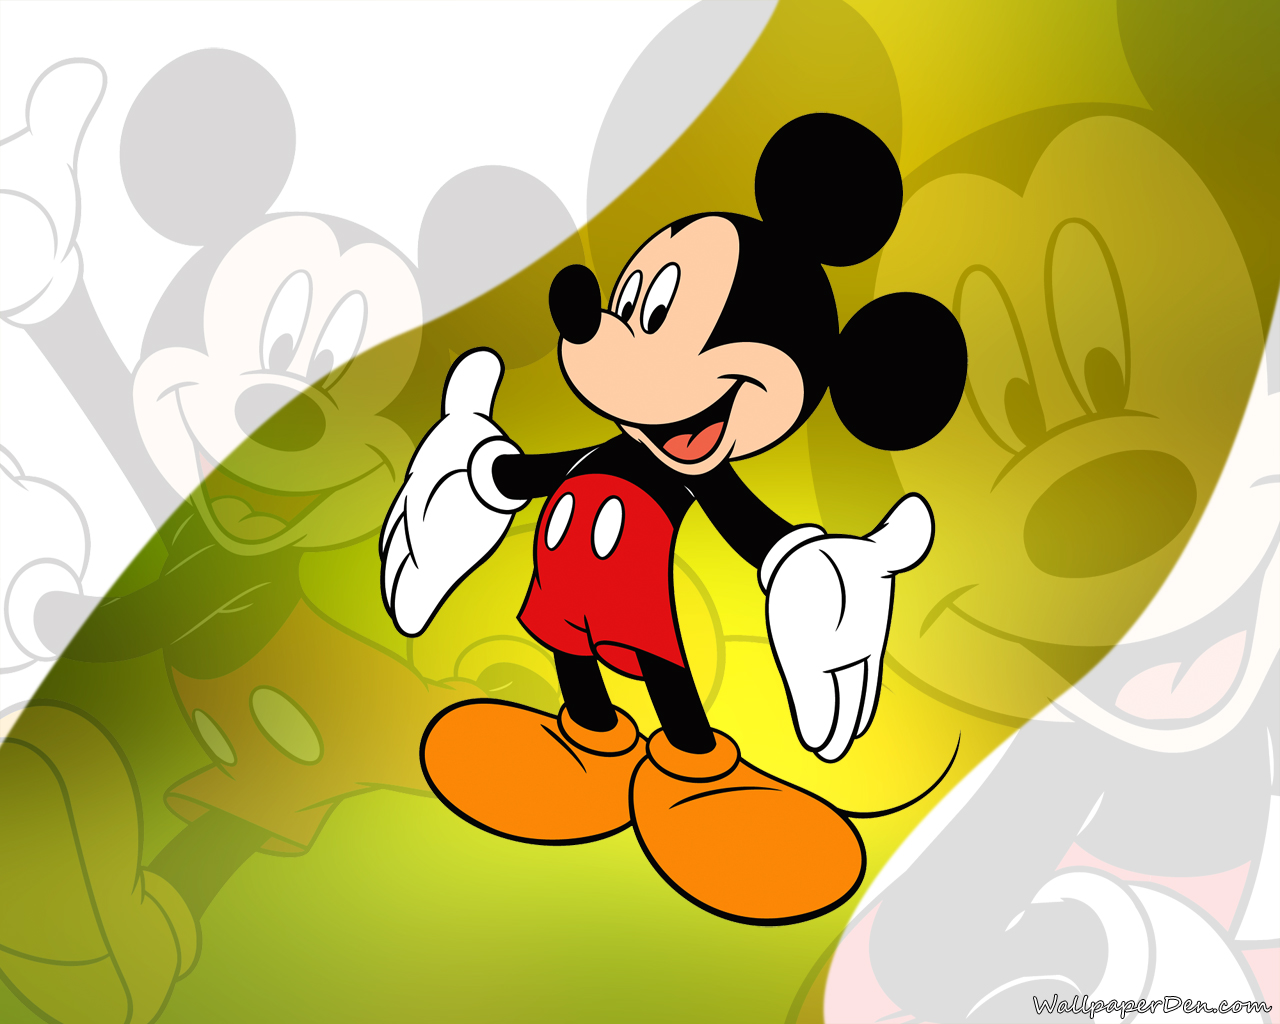 download wallpaper mickey mouse #20